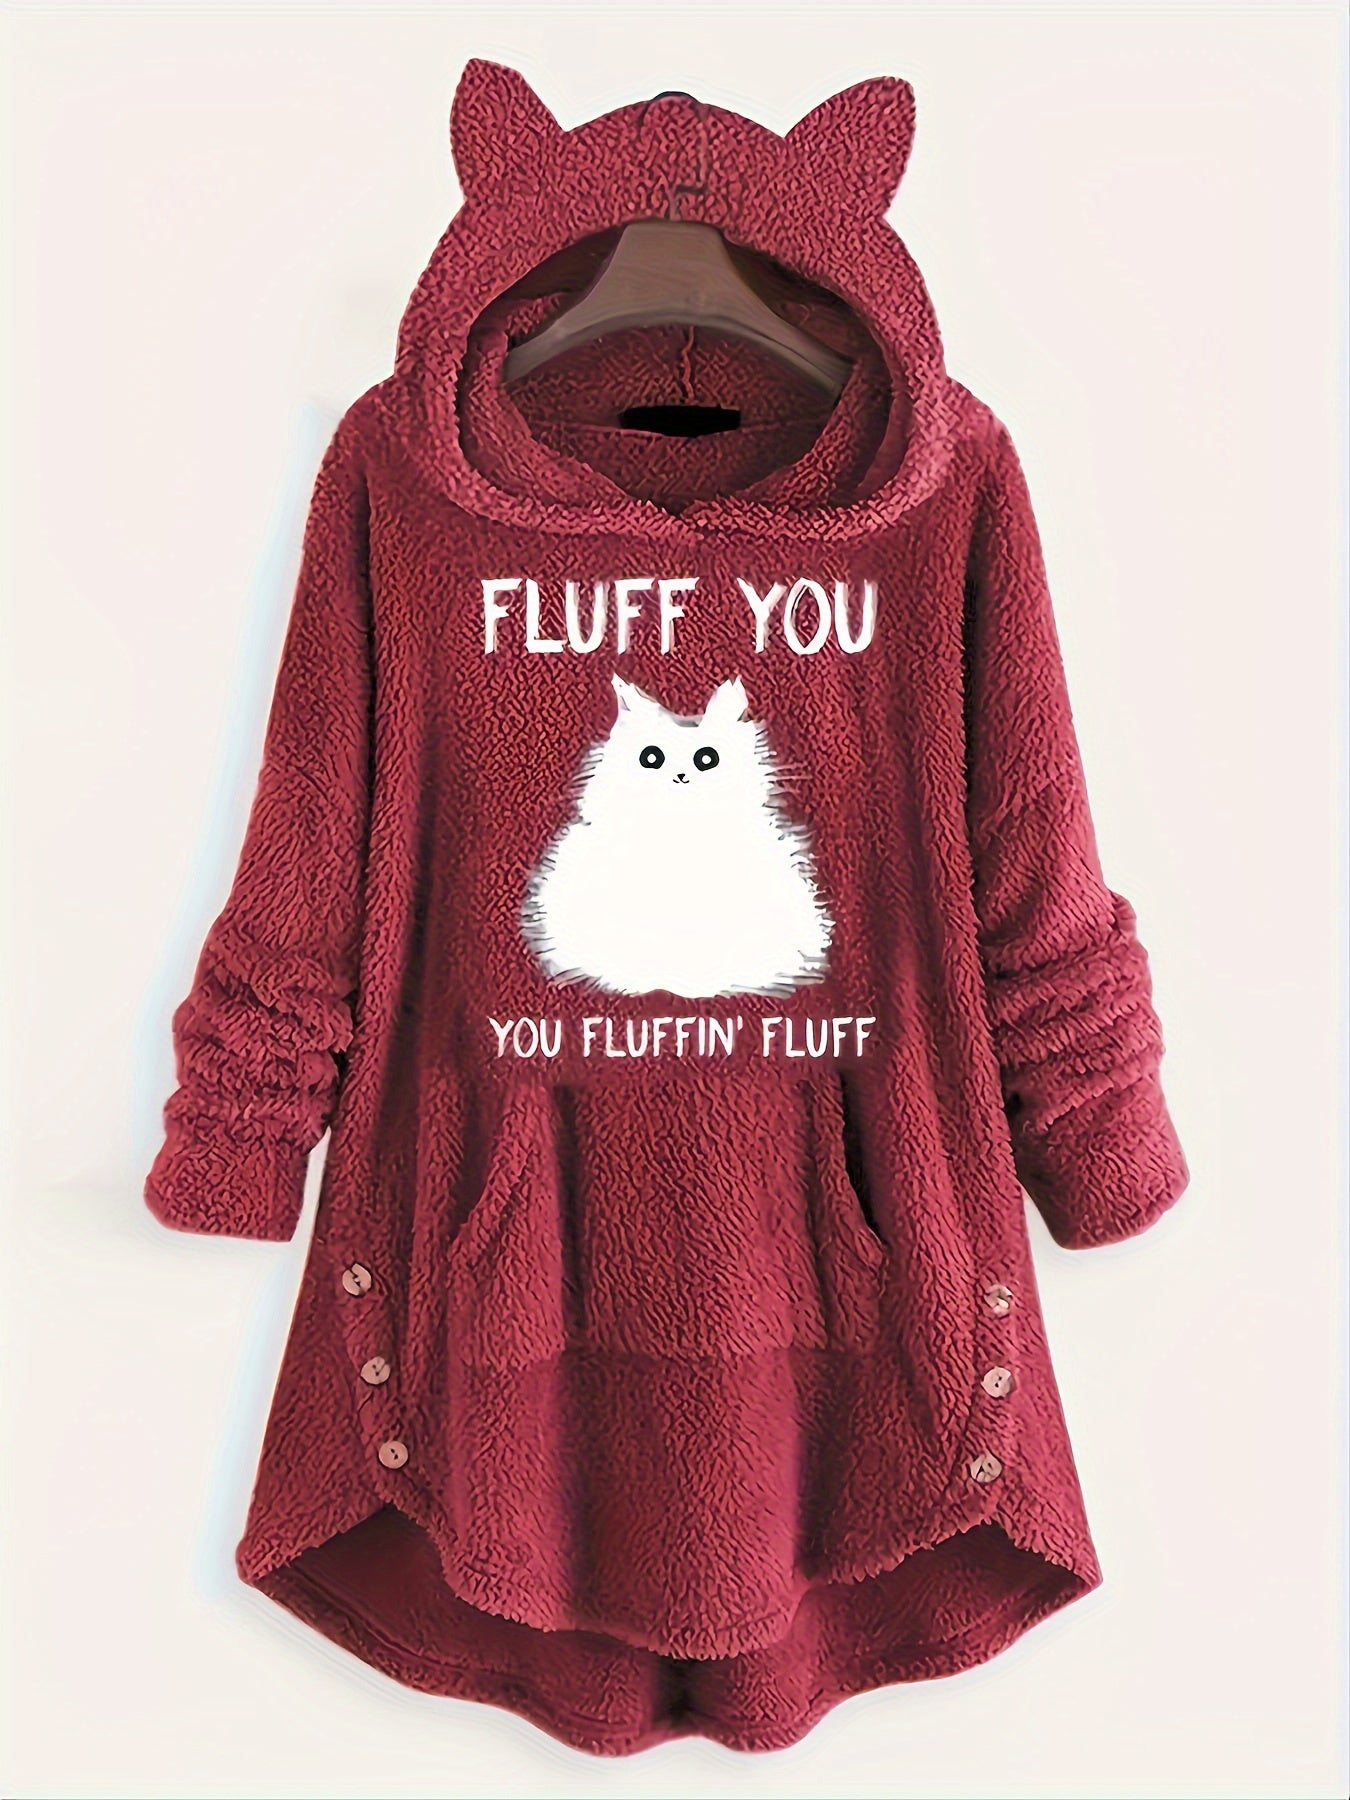 A Maramalive™ Plus Size Casual Sweatshirt, Women's Plus Slogan & Cat Print Fleece Button Decor Long Sleeve Cat Ear Button Decor Sweatshirt With Pockets. This casual pullover features the text "FLUFF YOU YOU FLUFFIN' FLUFF" printed above and below the adorable cartoon pattern.